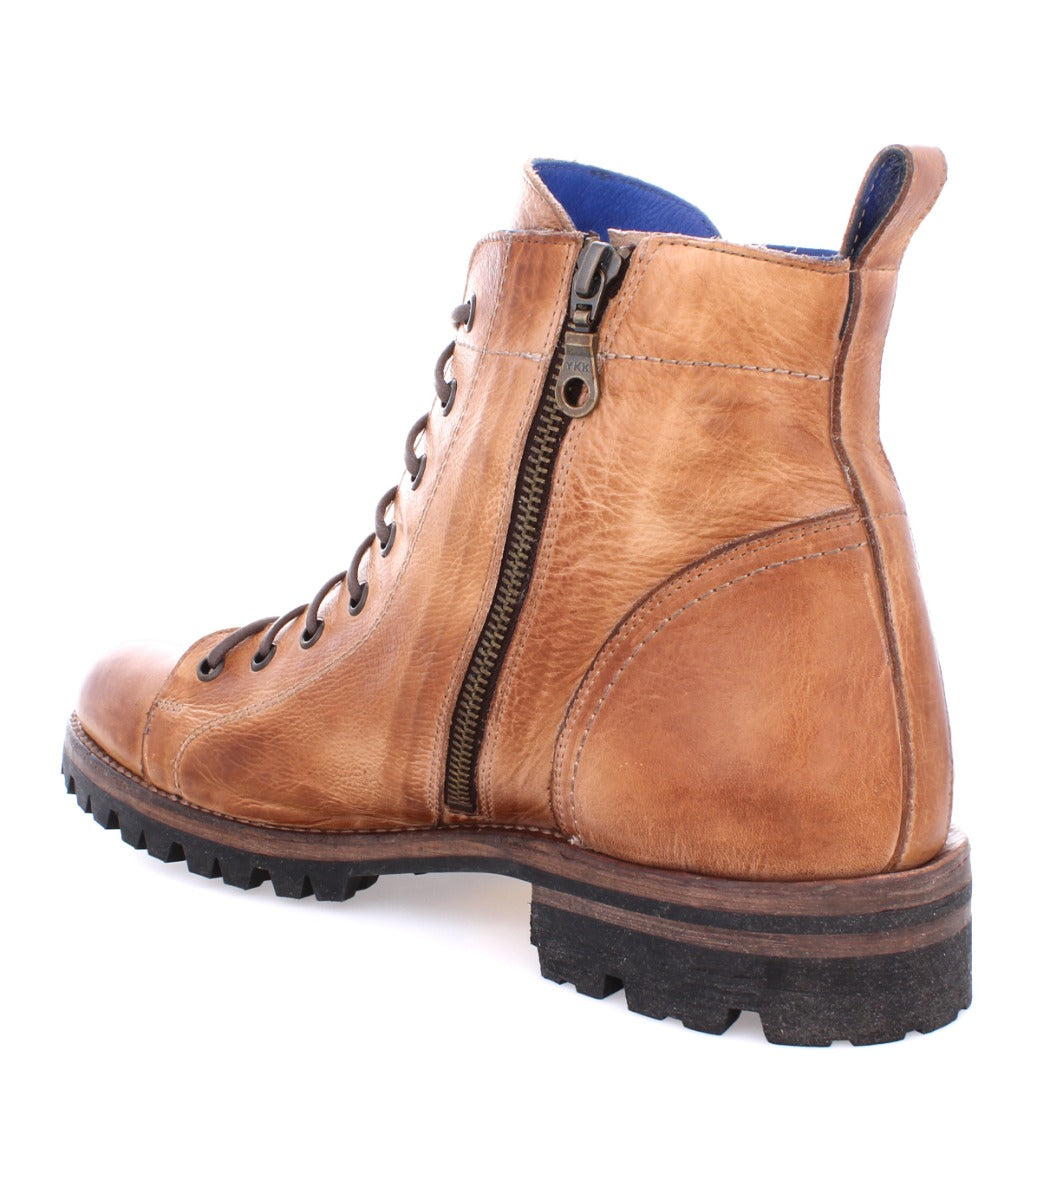 An Old Bowen Trek men's tan leather boot with blue zippers from Bed Stu.